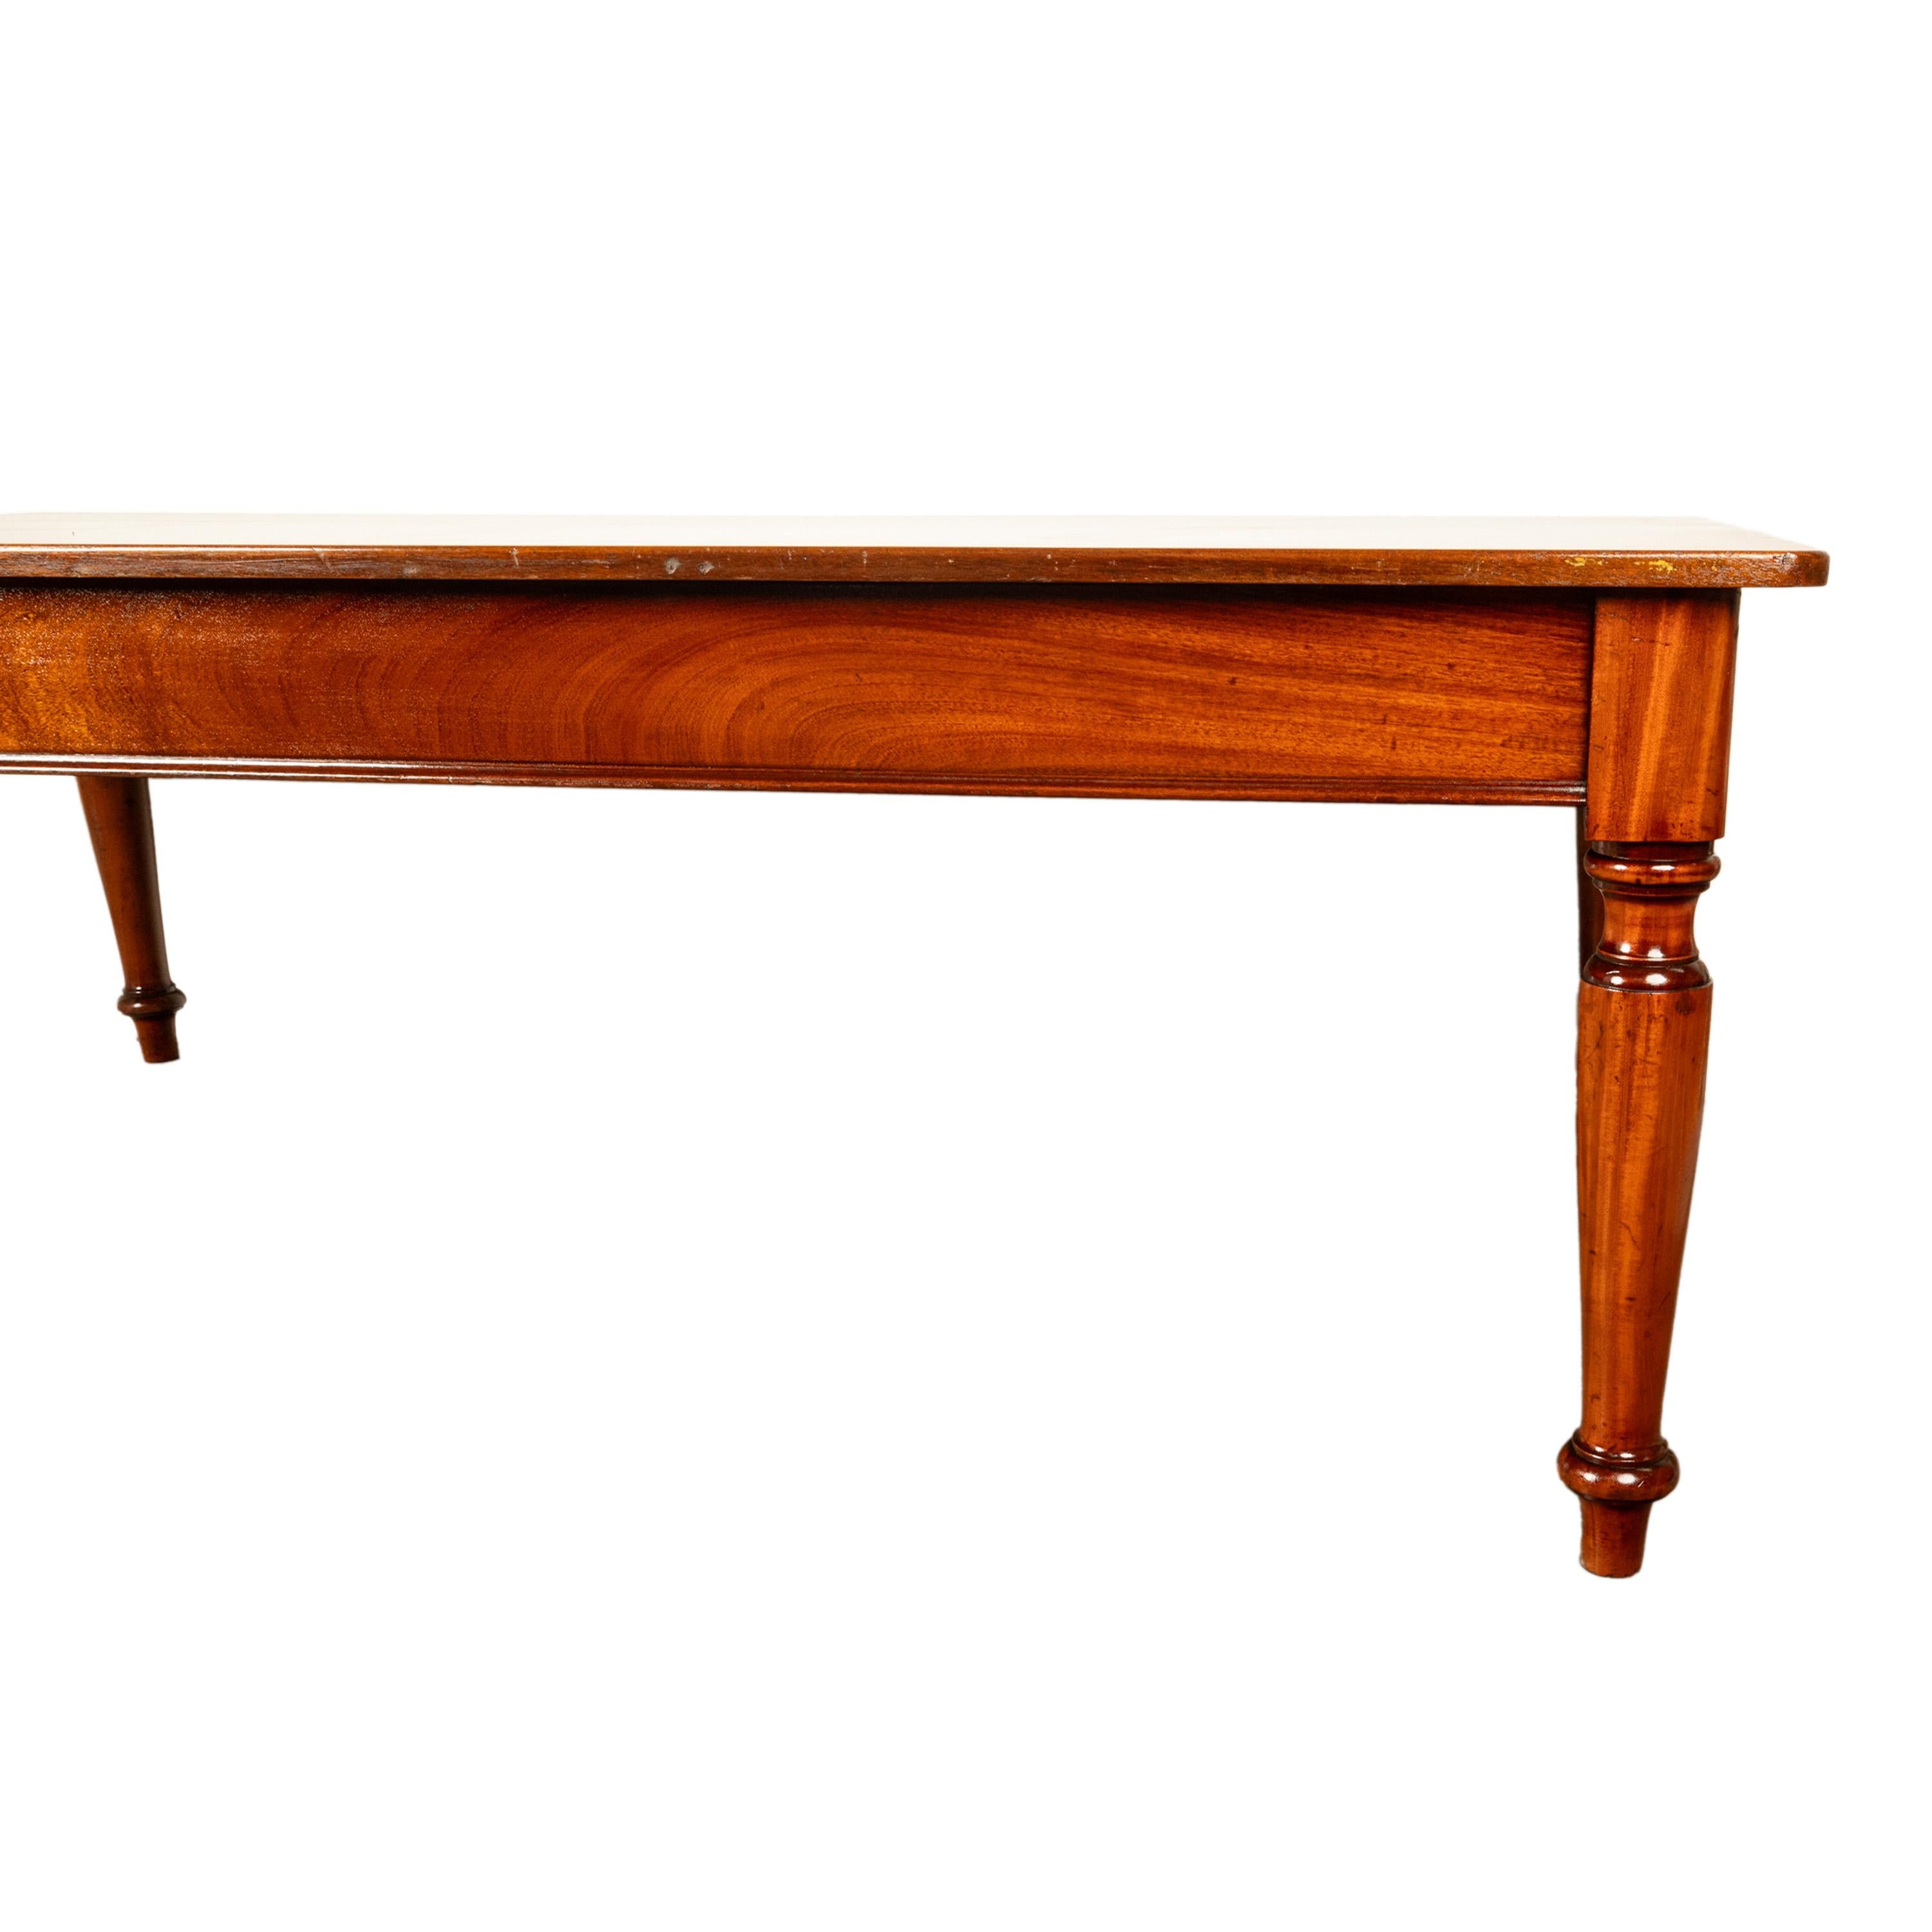 Antique Monumental 19th Century Mahogany Library Conference Dining Table 1860 For Sale 14